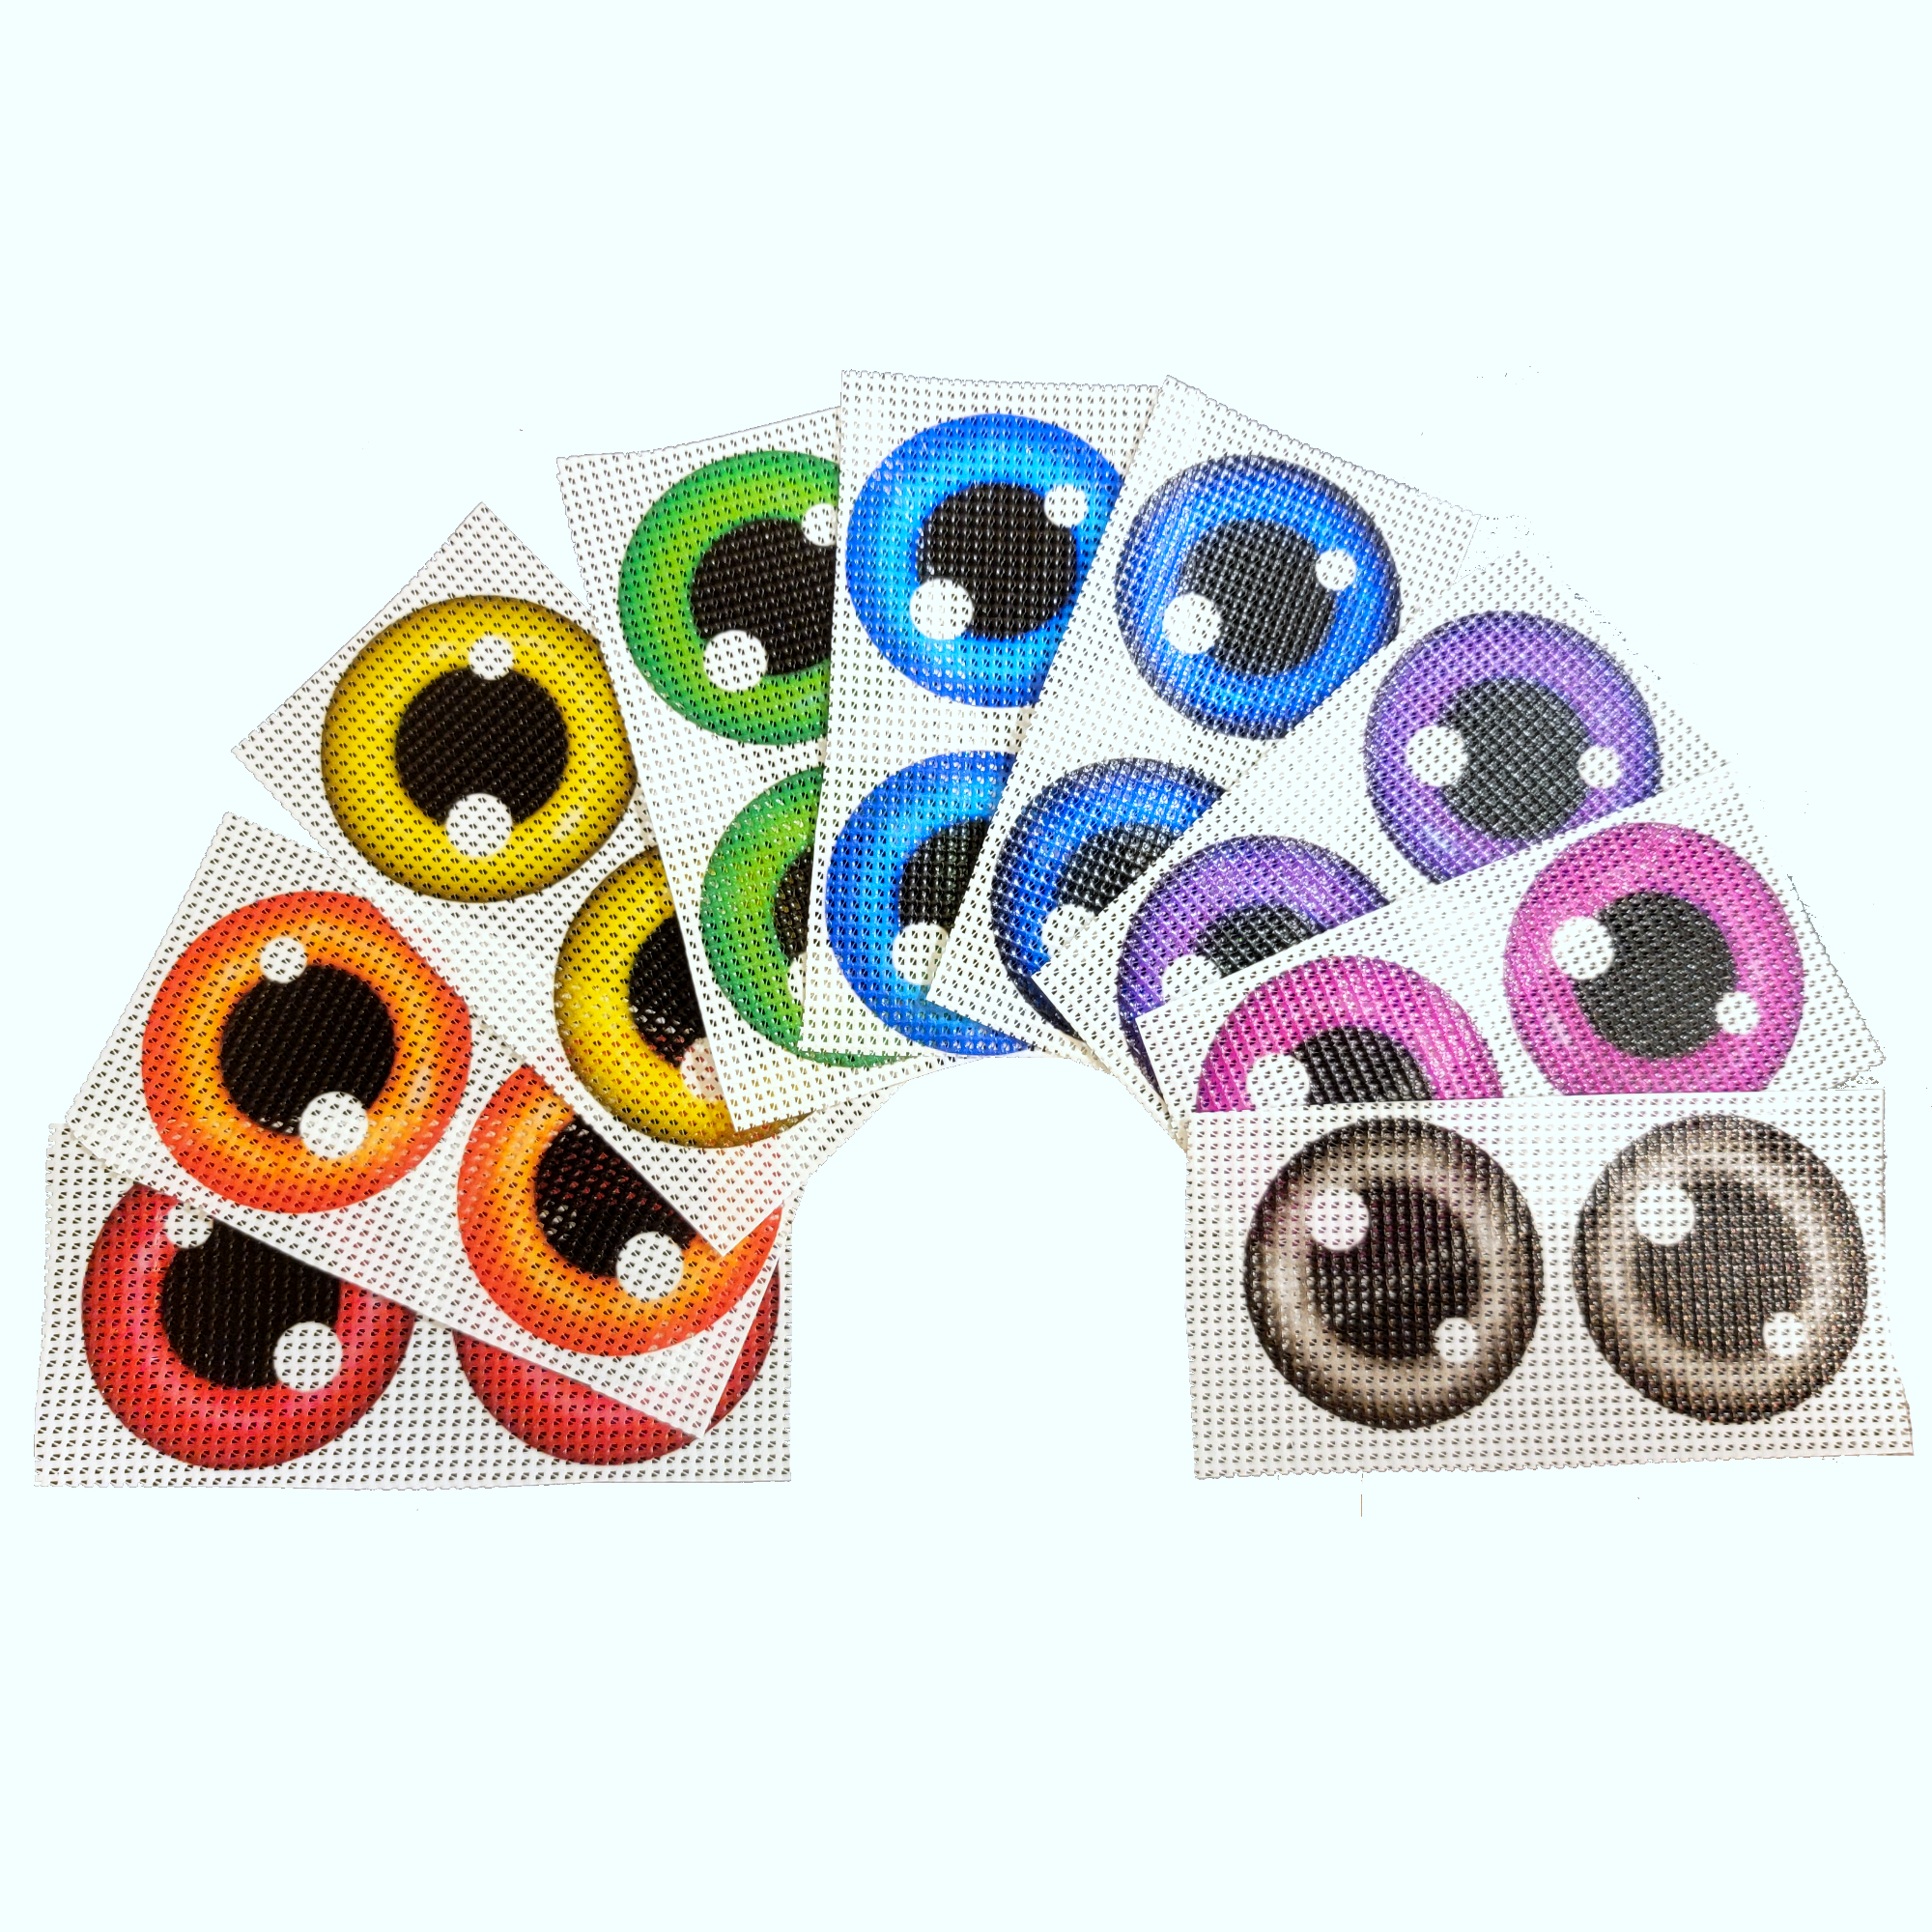 JAYCOSTUMES! @FC on X: NEW in my shop - Plastic Mesh Sheets for Fursuit  Eyes! Instead of buckram! Get it here -    / X